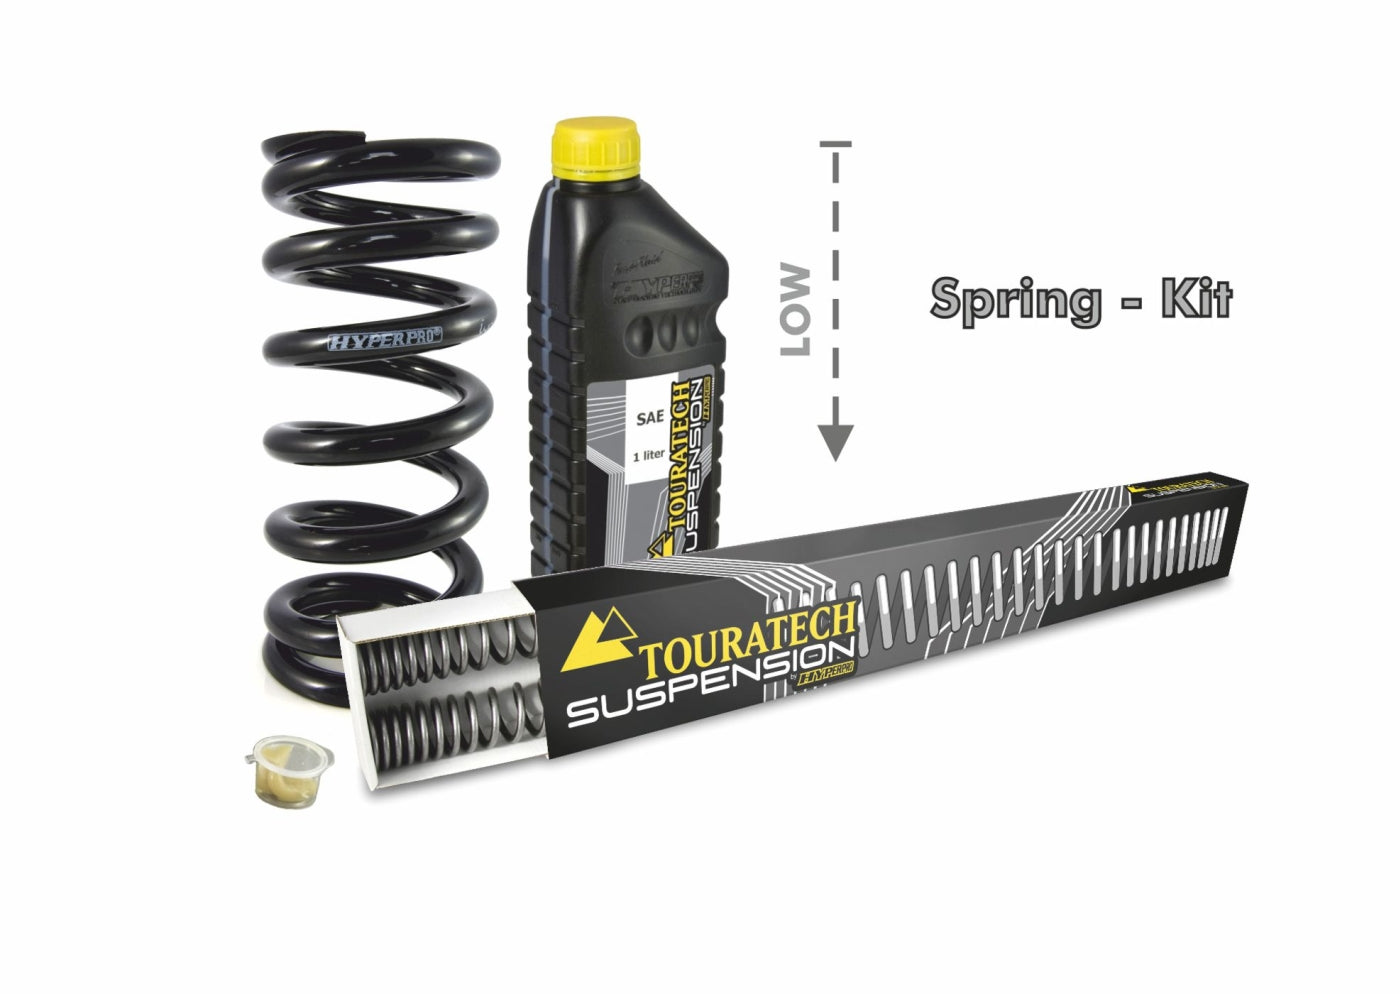 Touratech Suspension lowering kit -25mm for Yamaha MT-07 TRACER (USA: FJ-07) 2016 - 2019